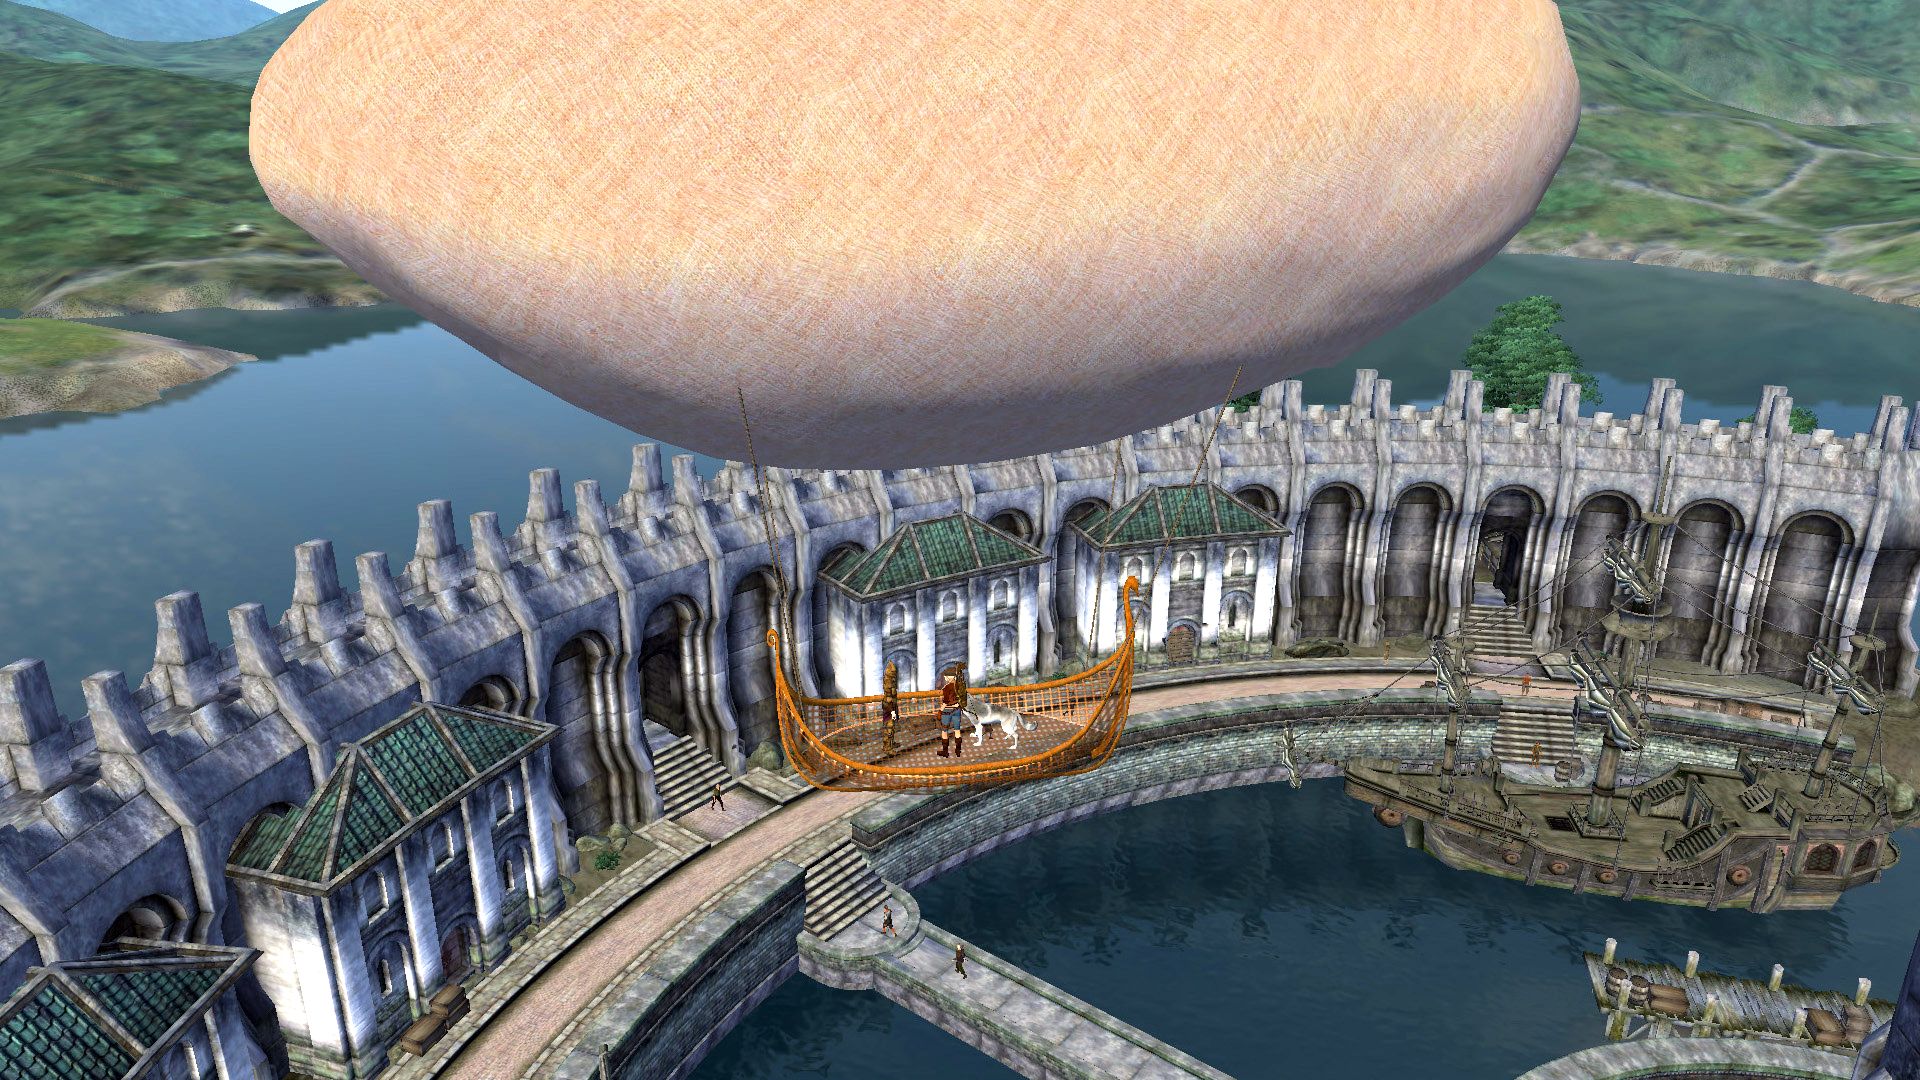 This Elder Scrolls 4 Oblivion mod lets you take to Cyrodiil’s skies in an airship